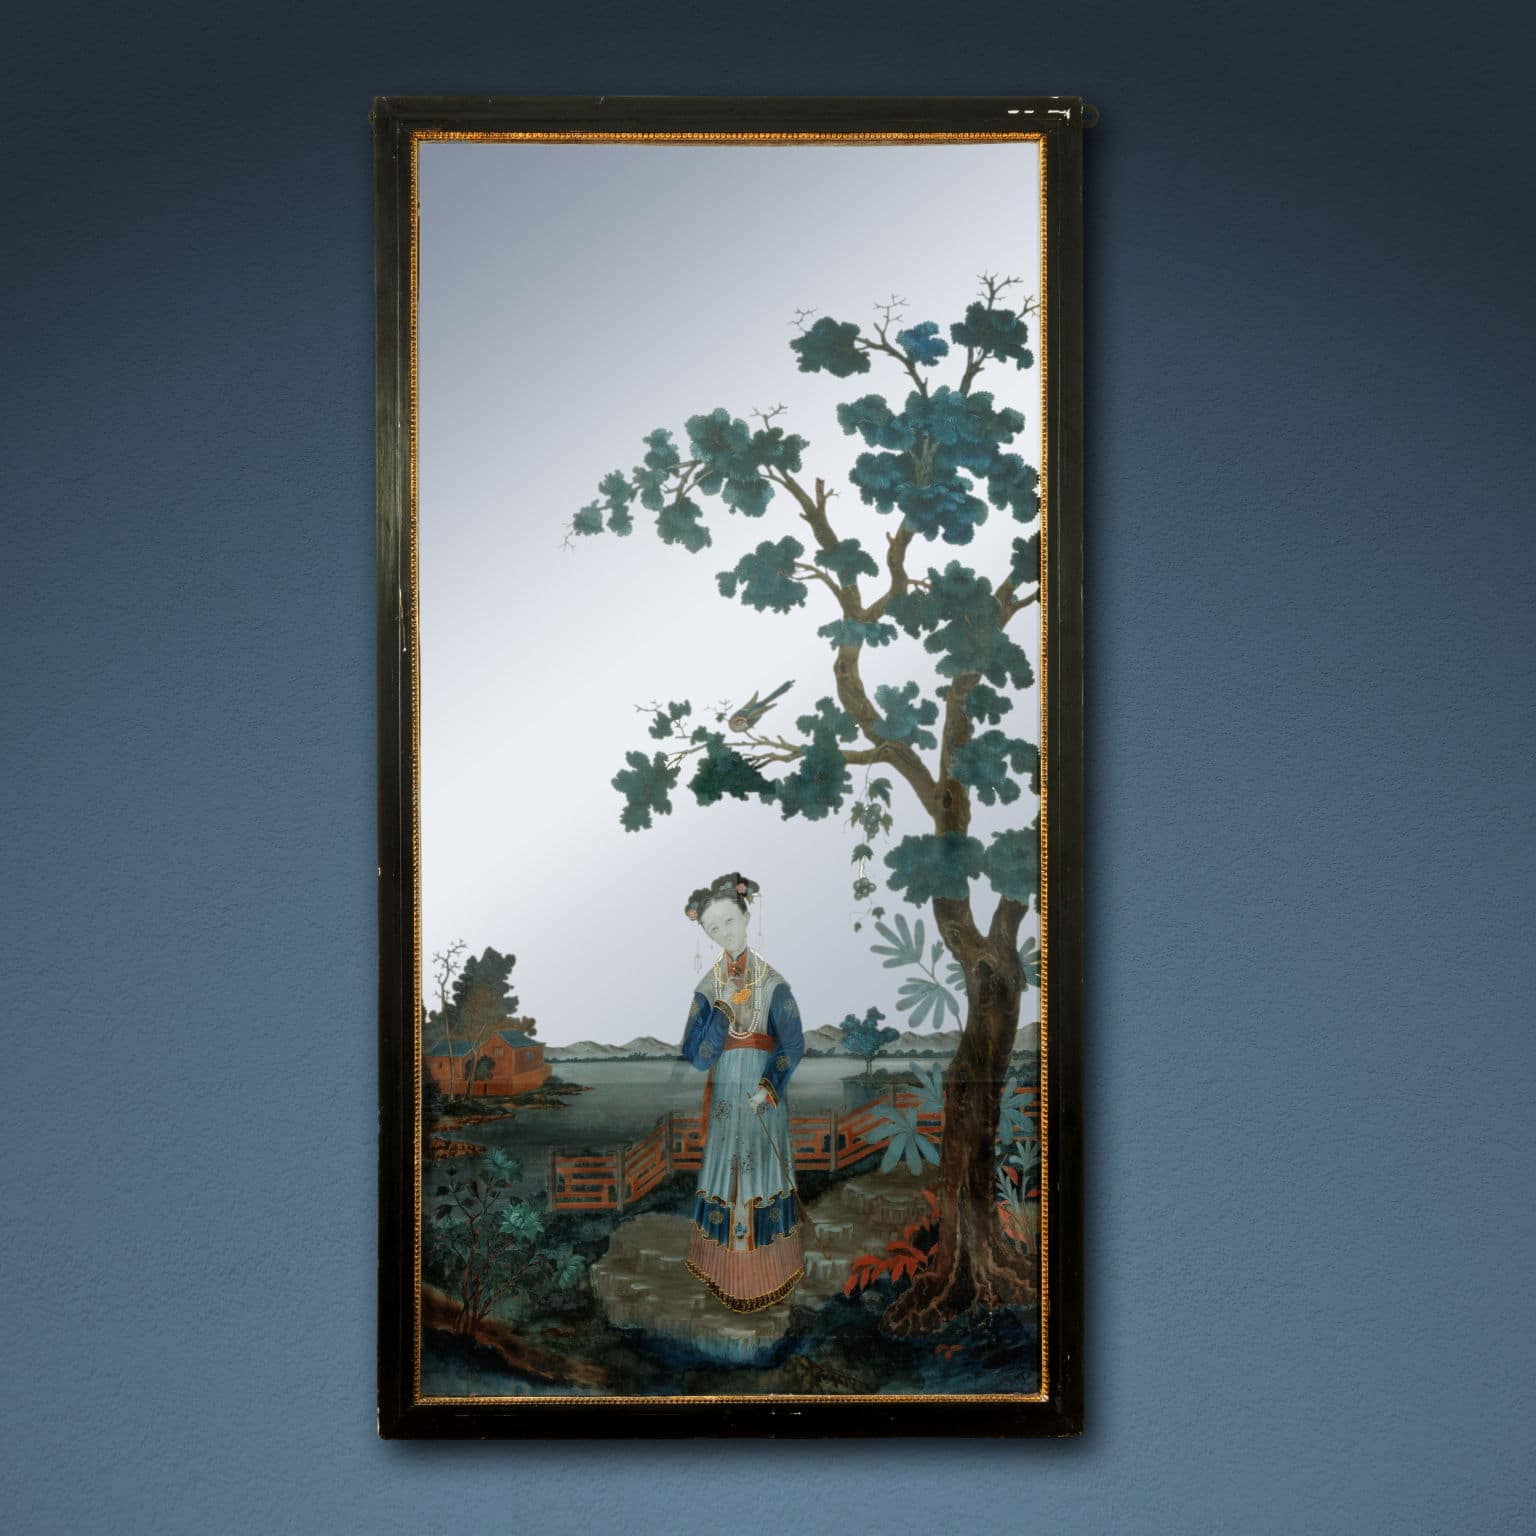 Chinese mirror, last quarter of the 18th century